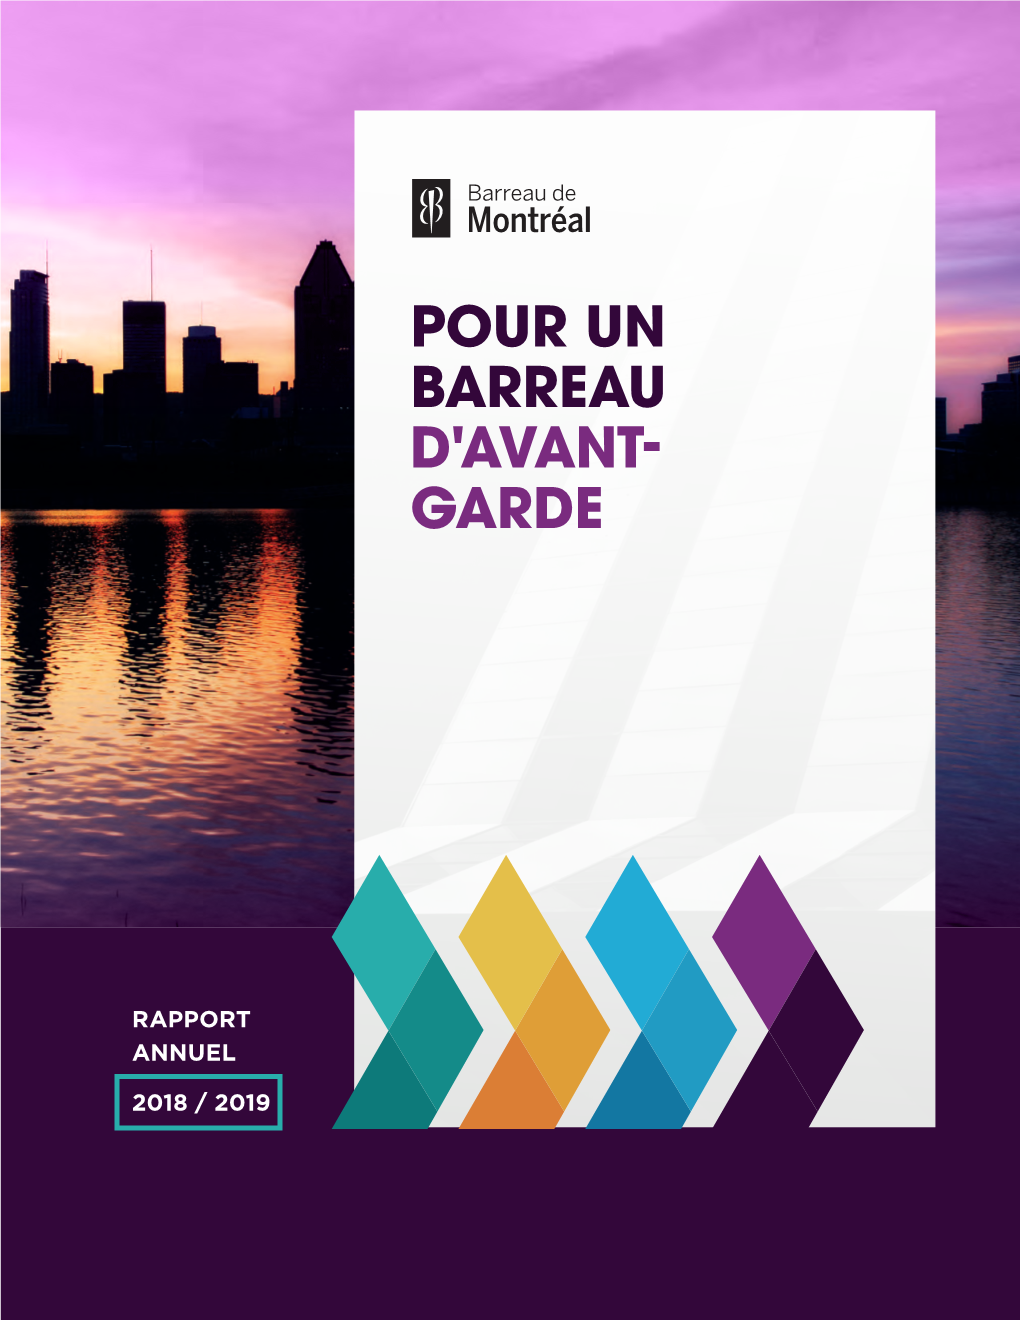 Rapport Annuel 2018 / 2019